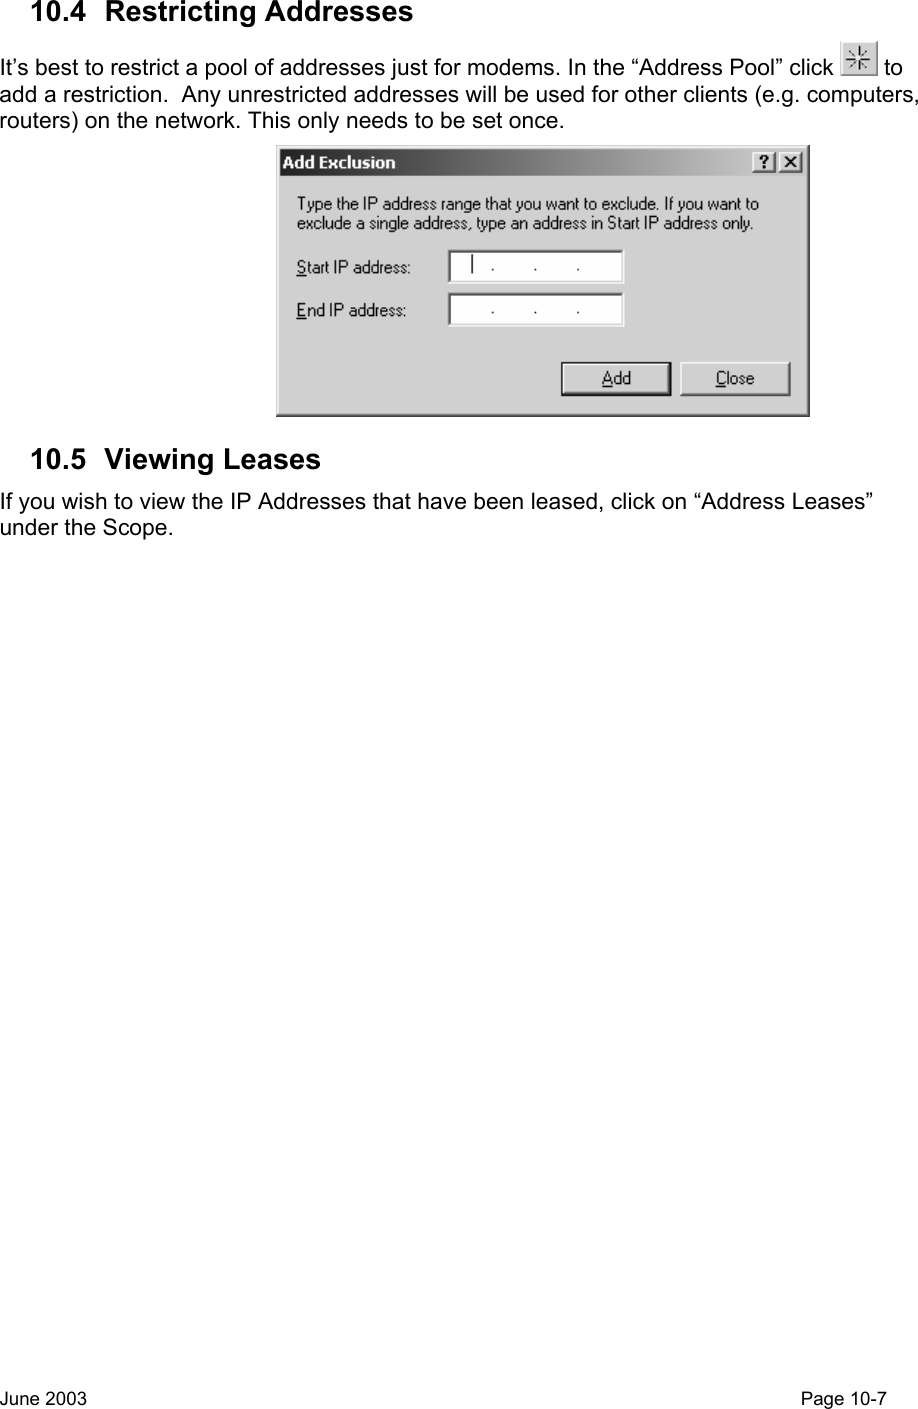  10.4 Restricting Addresses It’s best to restrict a pool of addresses just for modems. In the “Address Pool” click   to add a restriction.  Any unrestricted addresses will be used for other clients (e.g. computers, routers) on the network. This only needs to be set once.  10.5 Viewing Leases If you wish to view the IP Addresses that have been leased, click on “Address Leases” under the Scope. June 2003                                                                                                                                         Page 10-7  